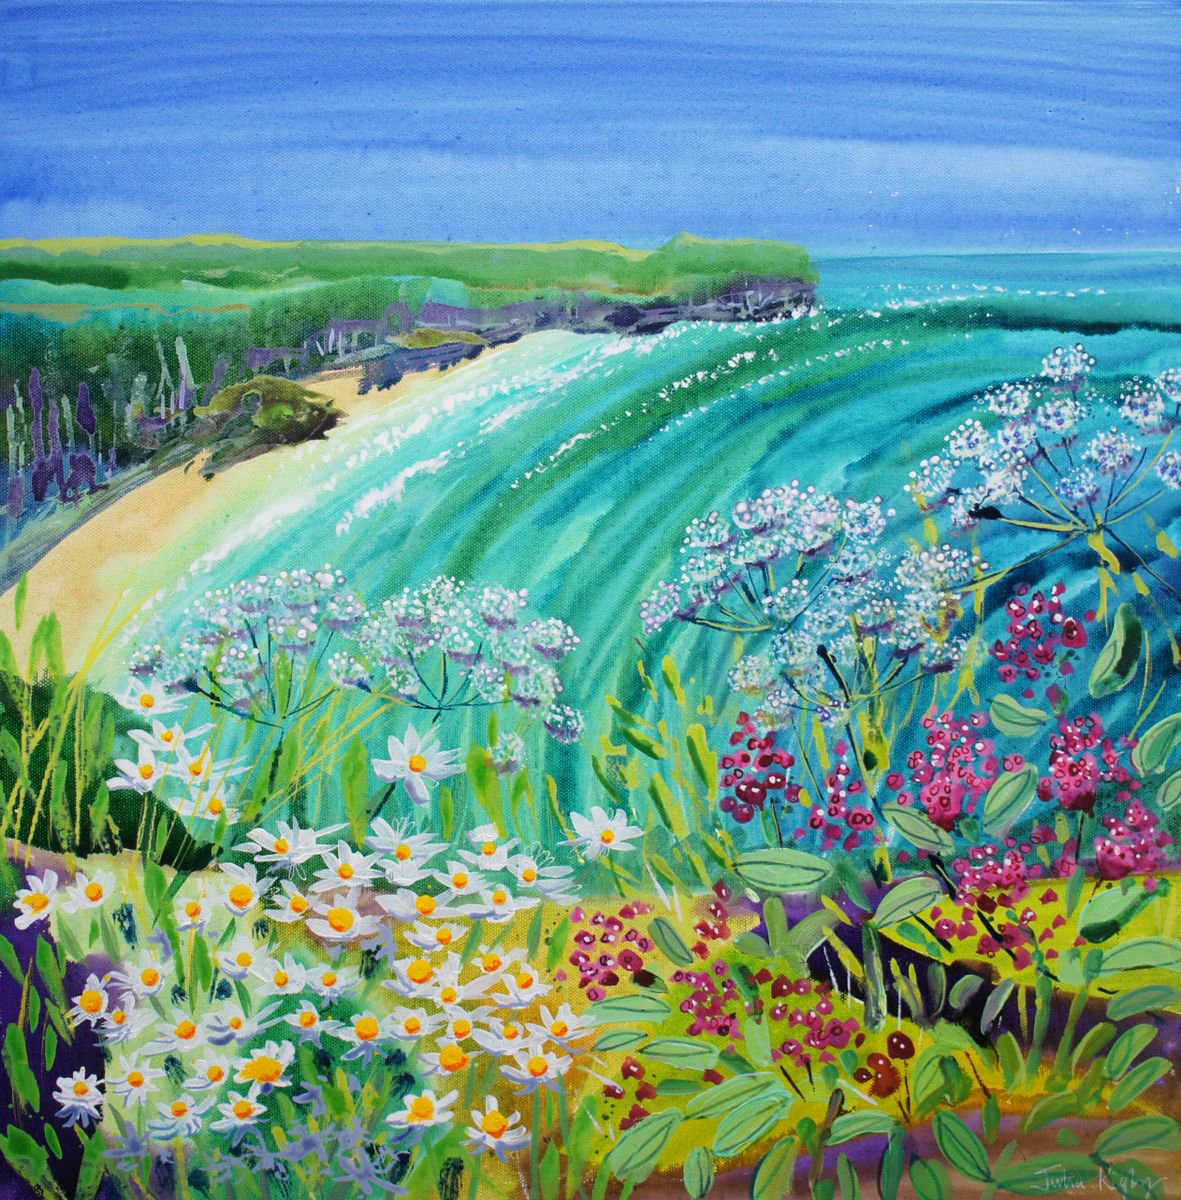 Porthcurno Beach from the Minack by Julia Rigby